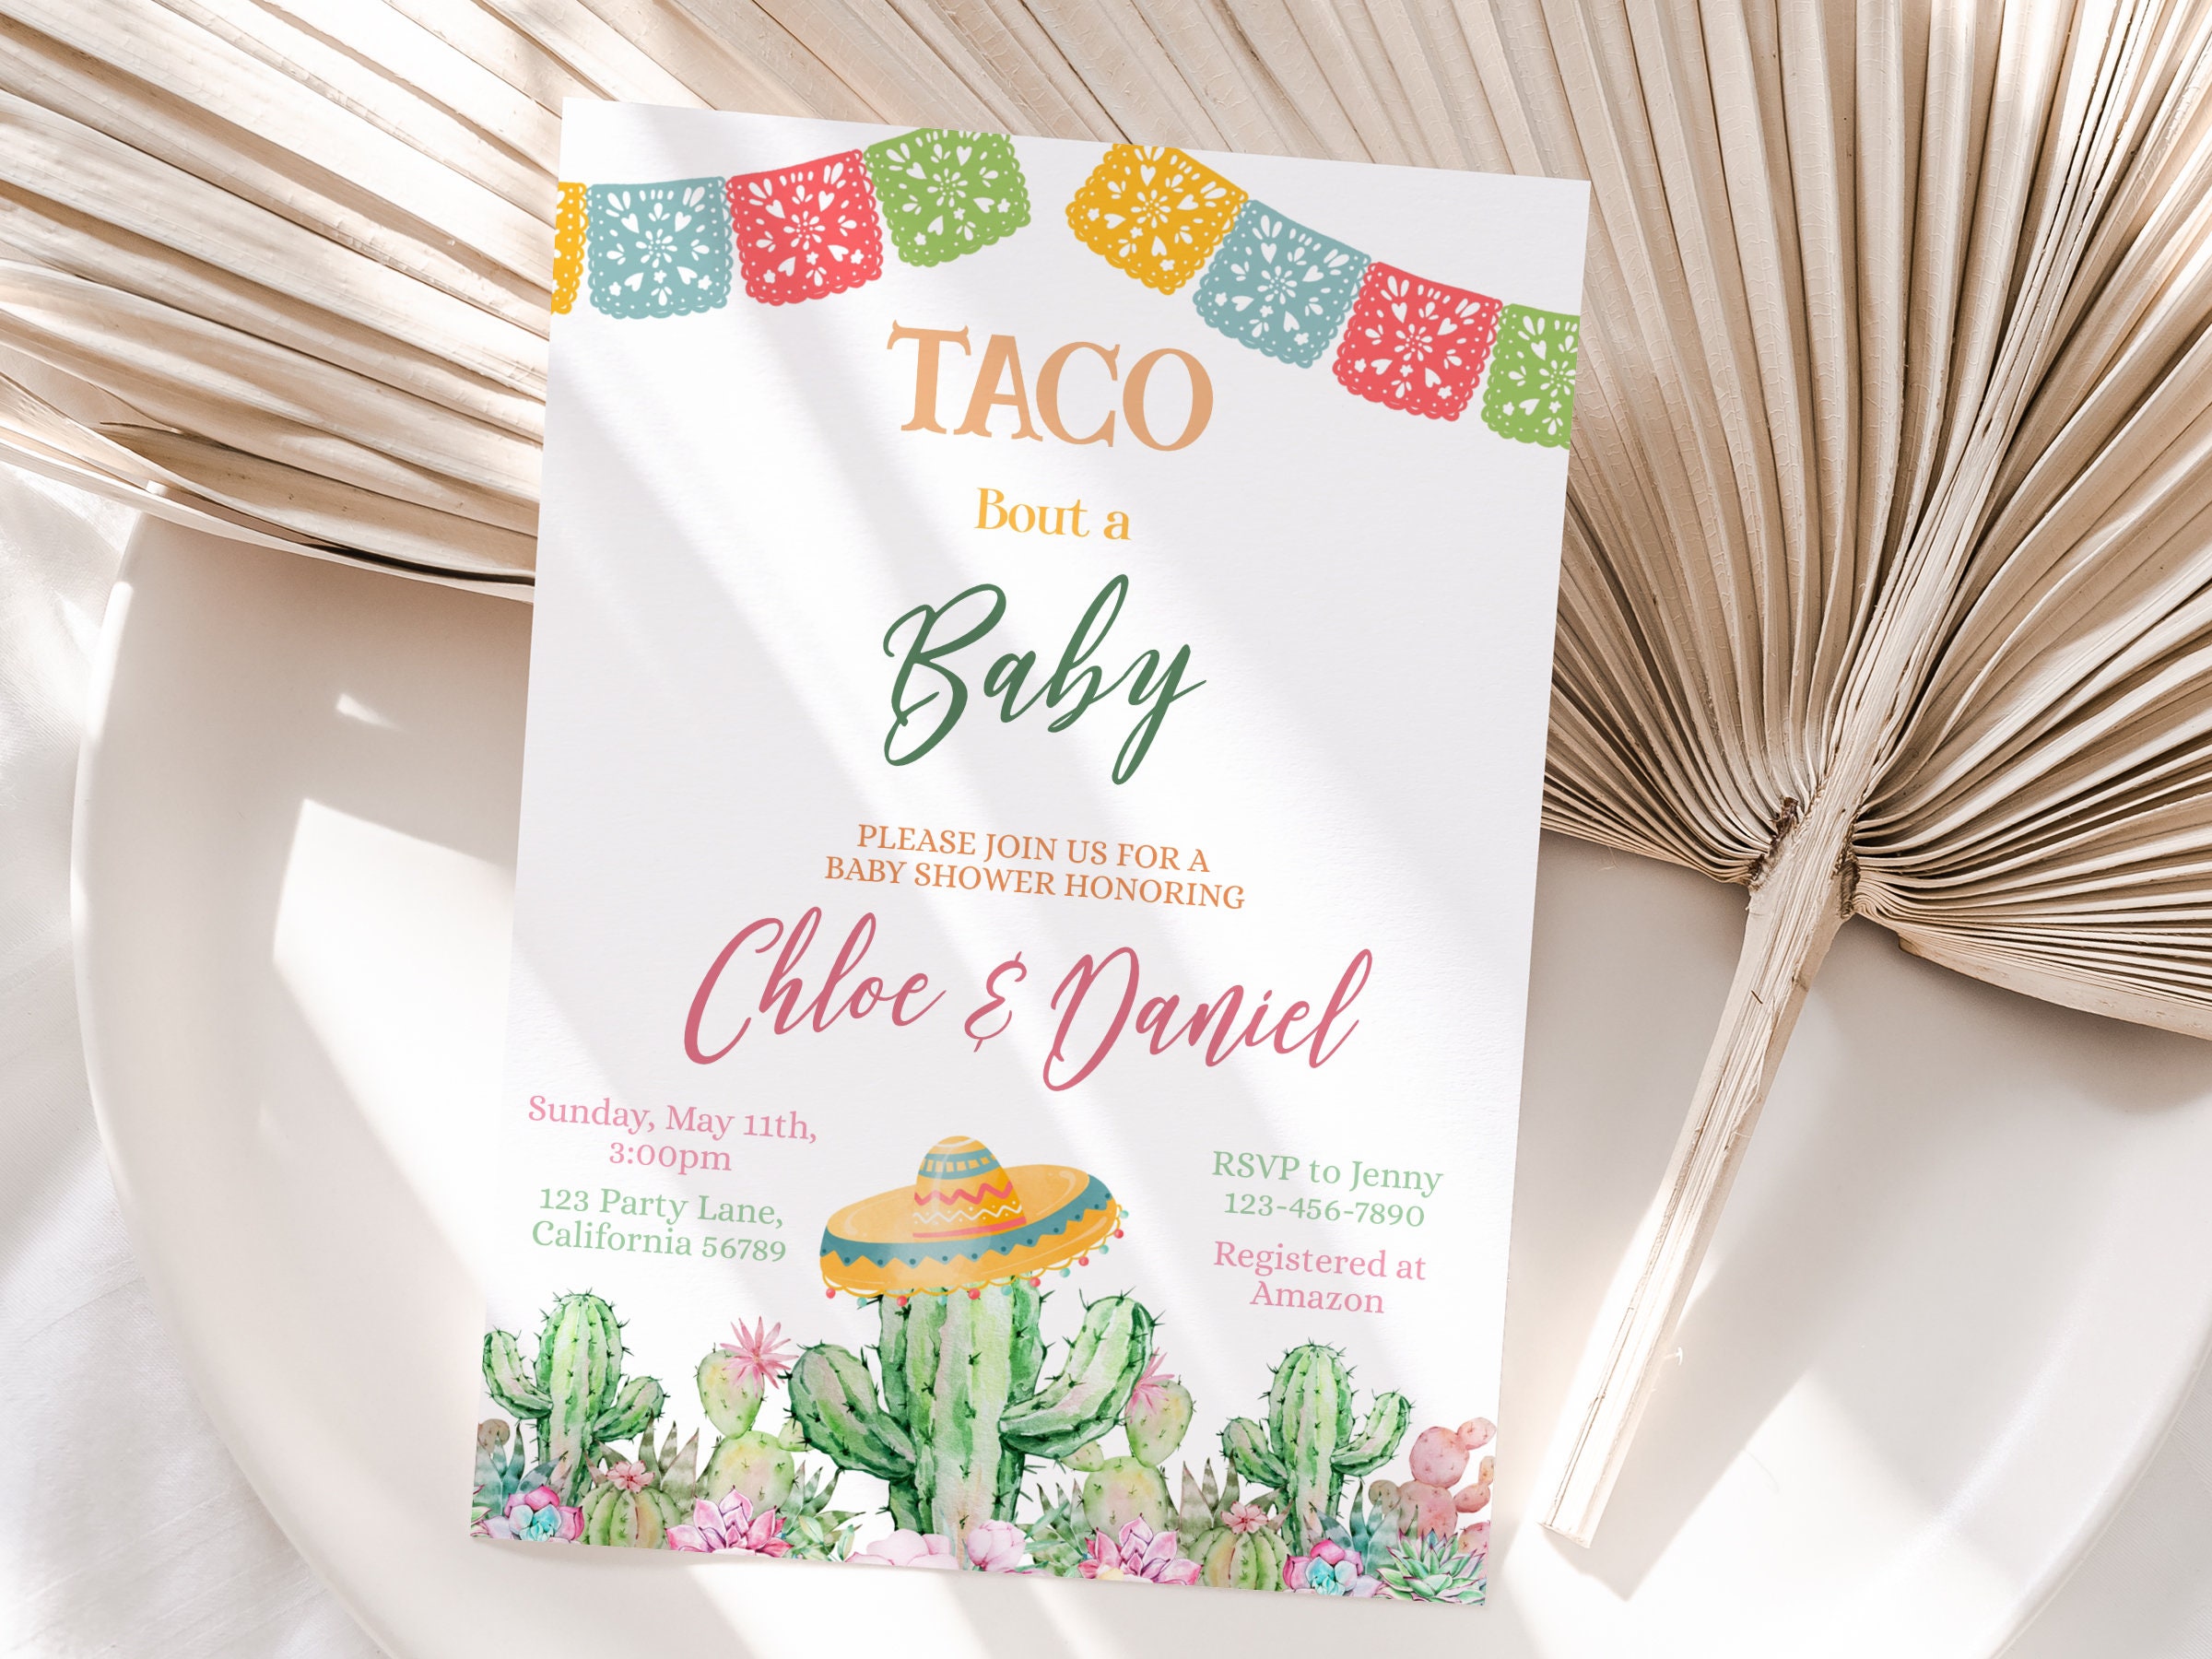 Taco Bout a Baby Shower for Baby Griffin! - Simply Madisynn